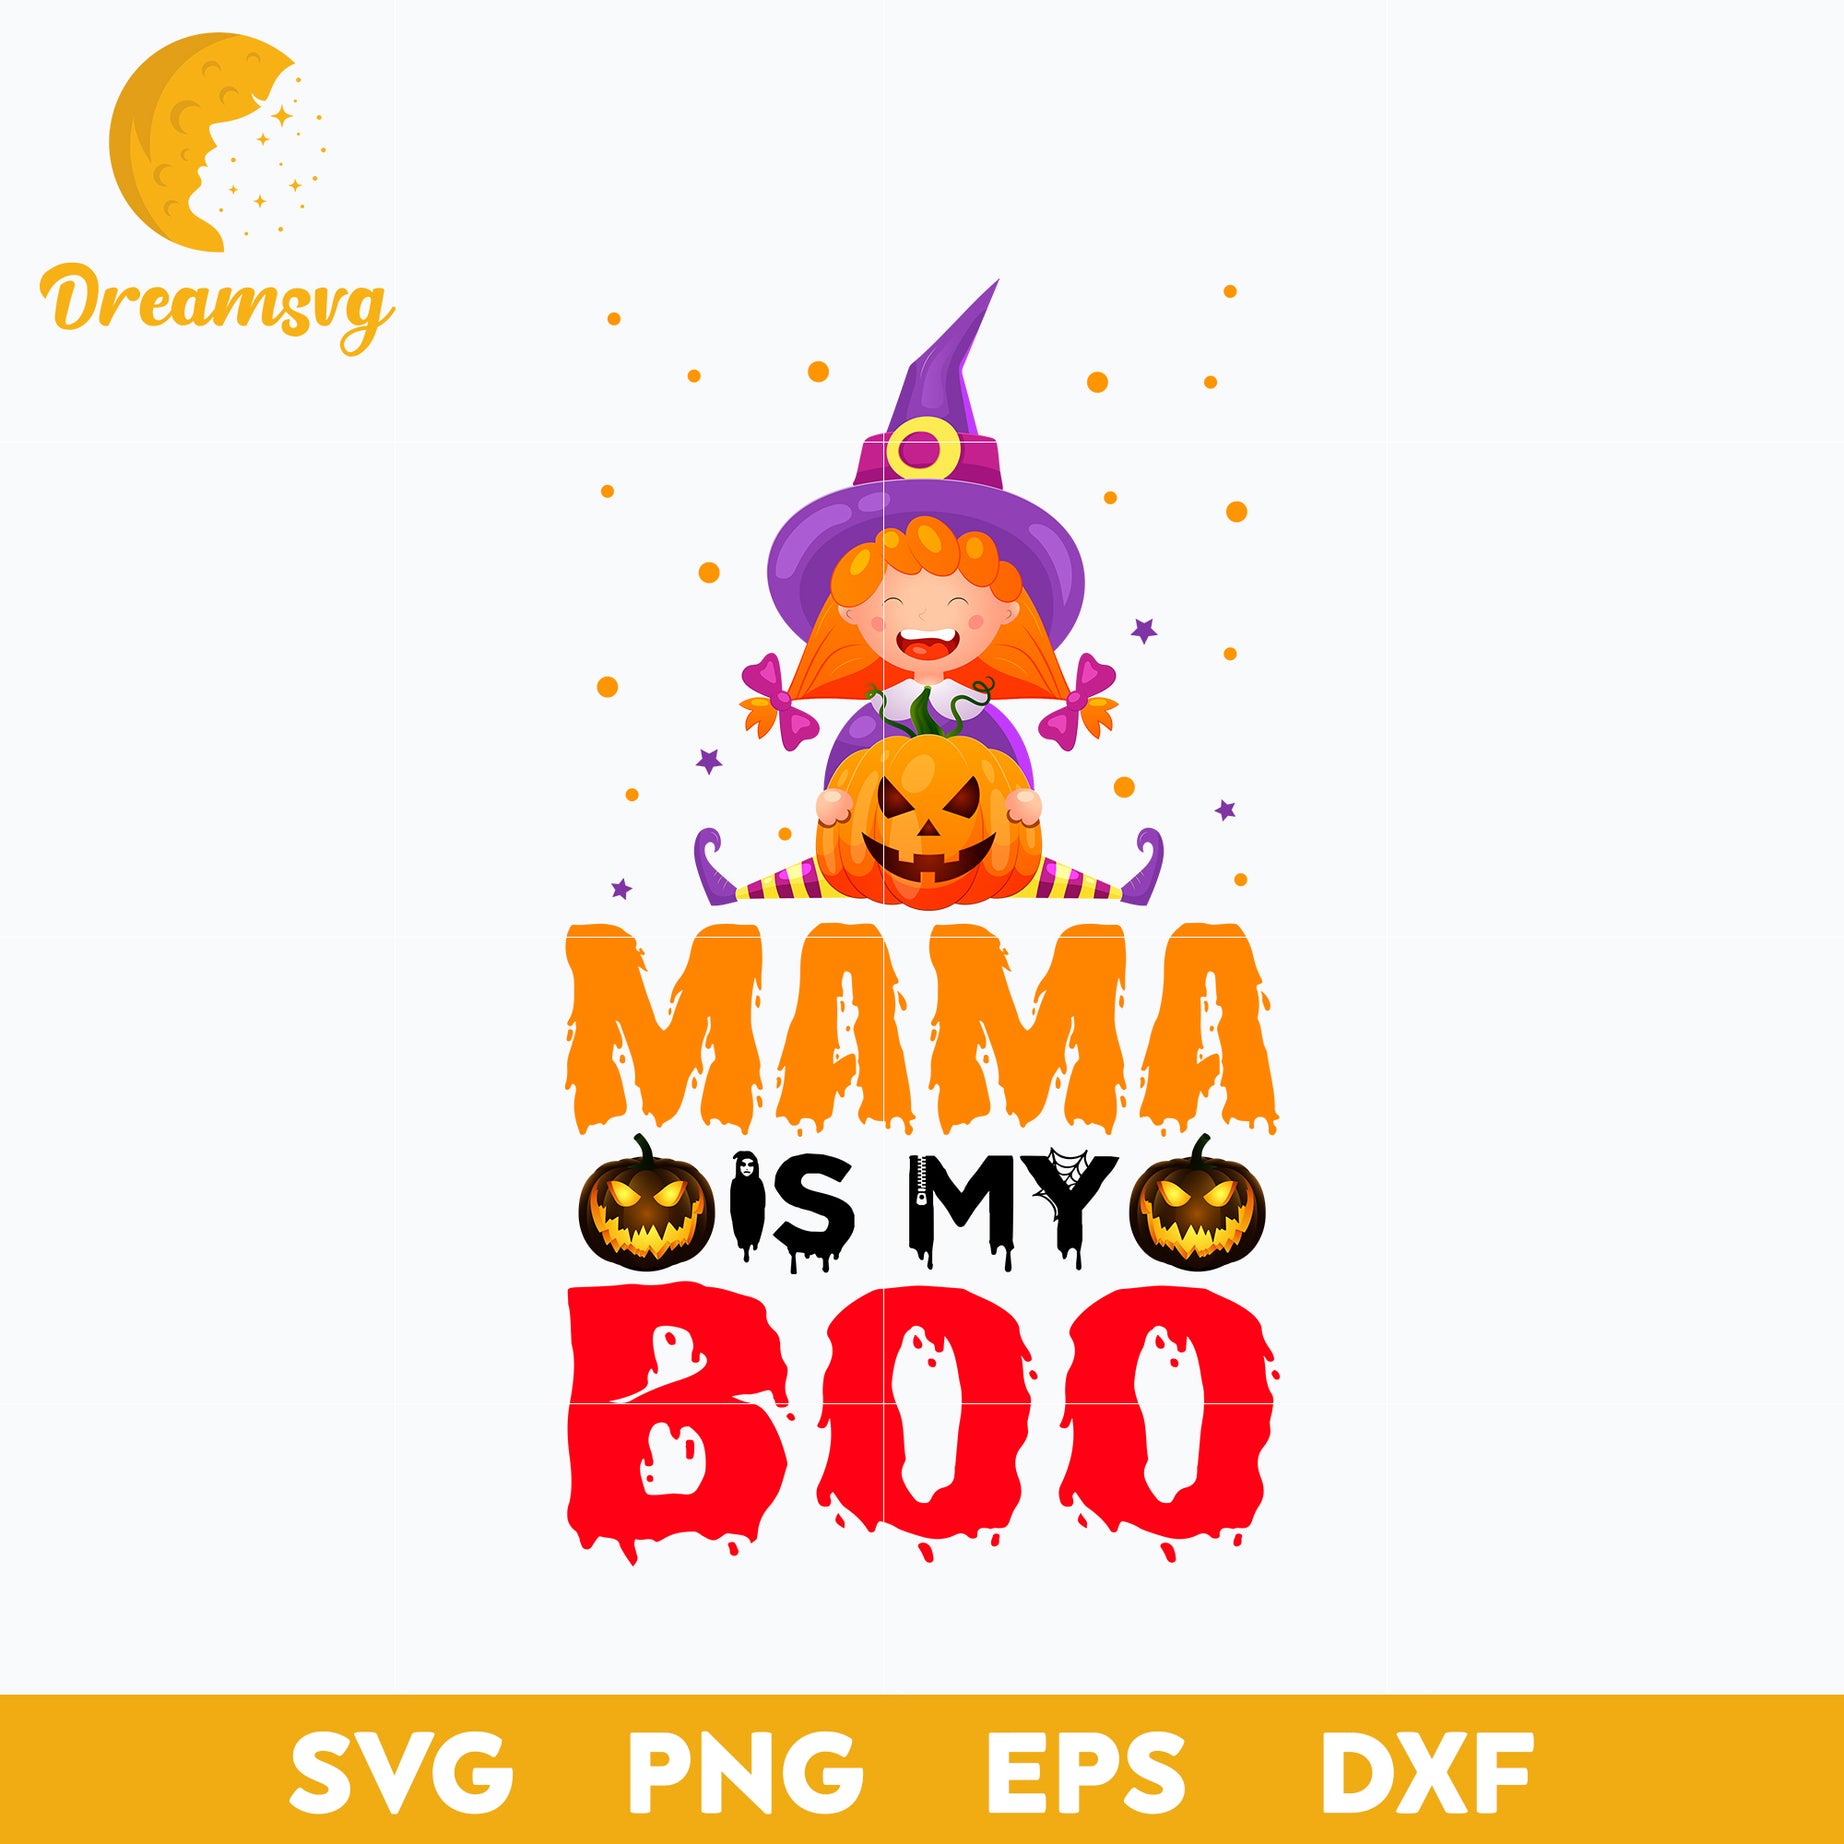 Mama is my boo  svg, Halloween svg, png, dxf, eps digital file.